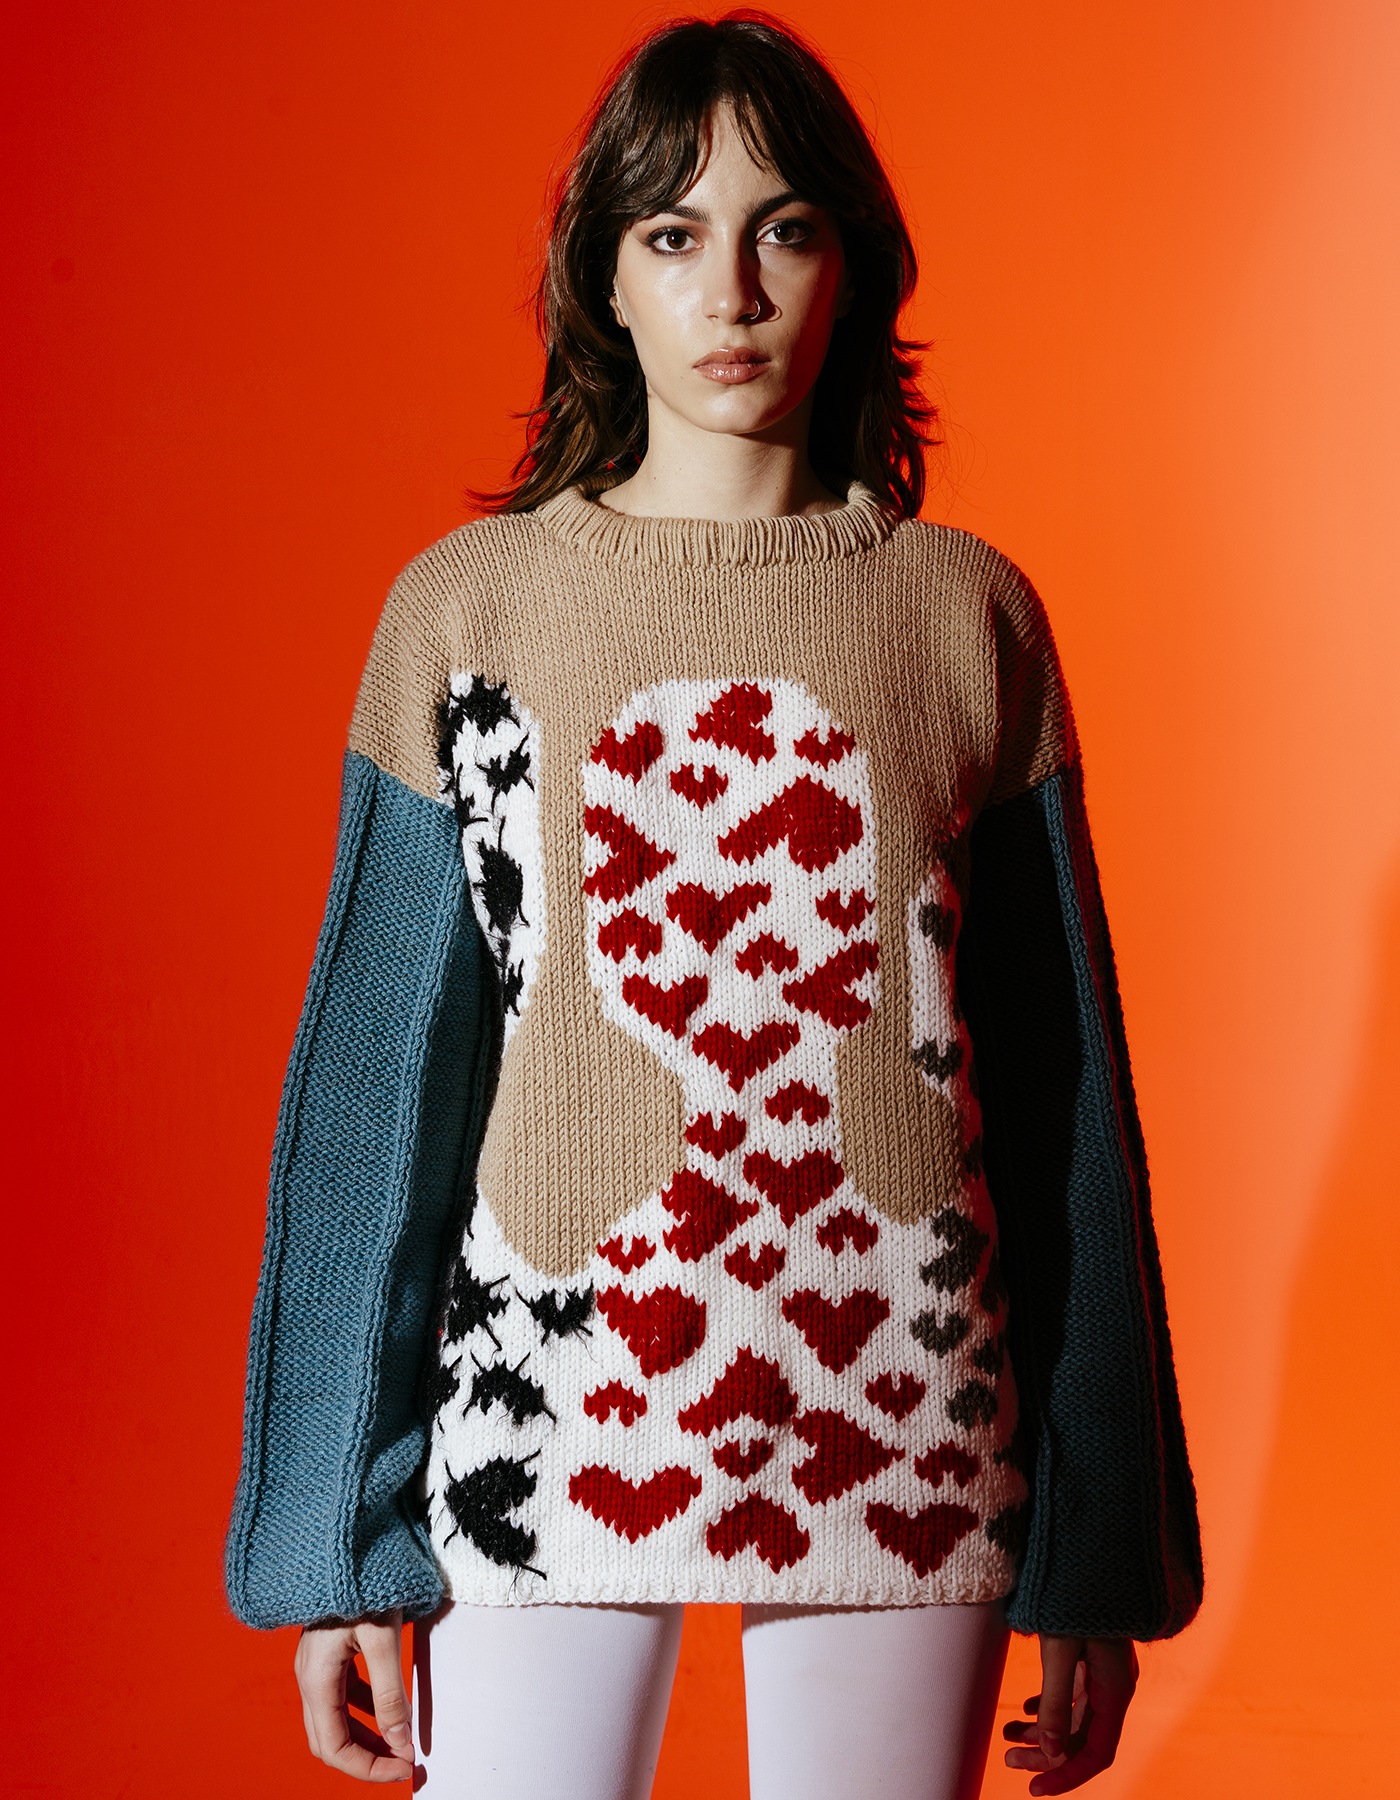 KNIT SWEATER OF EMOTIONS: IN LOVE